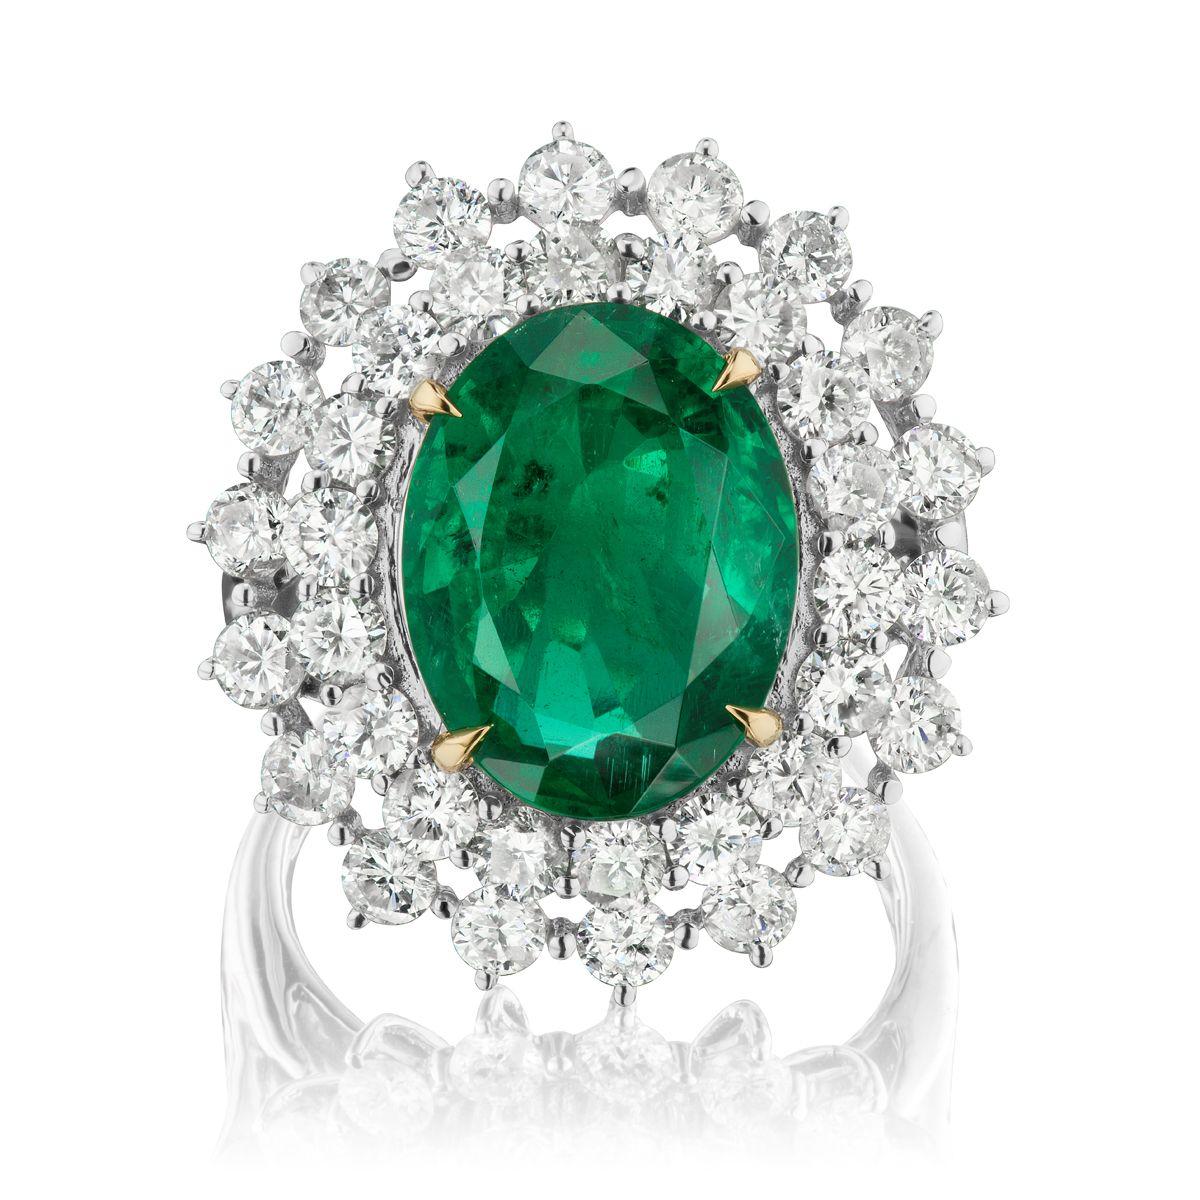 EMERALD AND DIAMOND RING
A rich 5 ct oval Emerald sits with round shaped diamonds in a
substantial white gold setting
Item: # 02418
Metal: 18k W
Color Weight: 5.27 ct.
Diamond Weight: 2.83 ct.